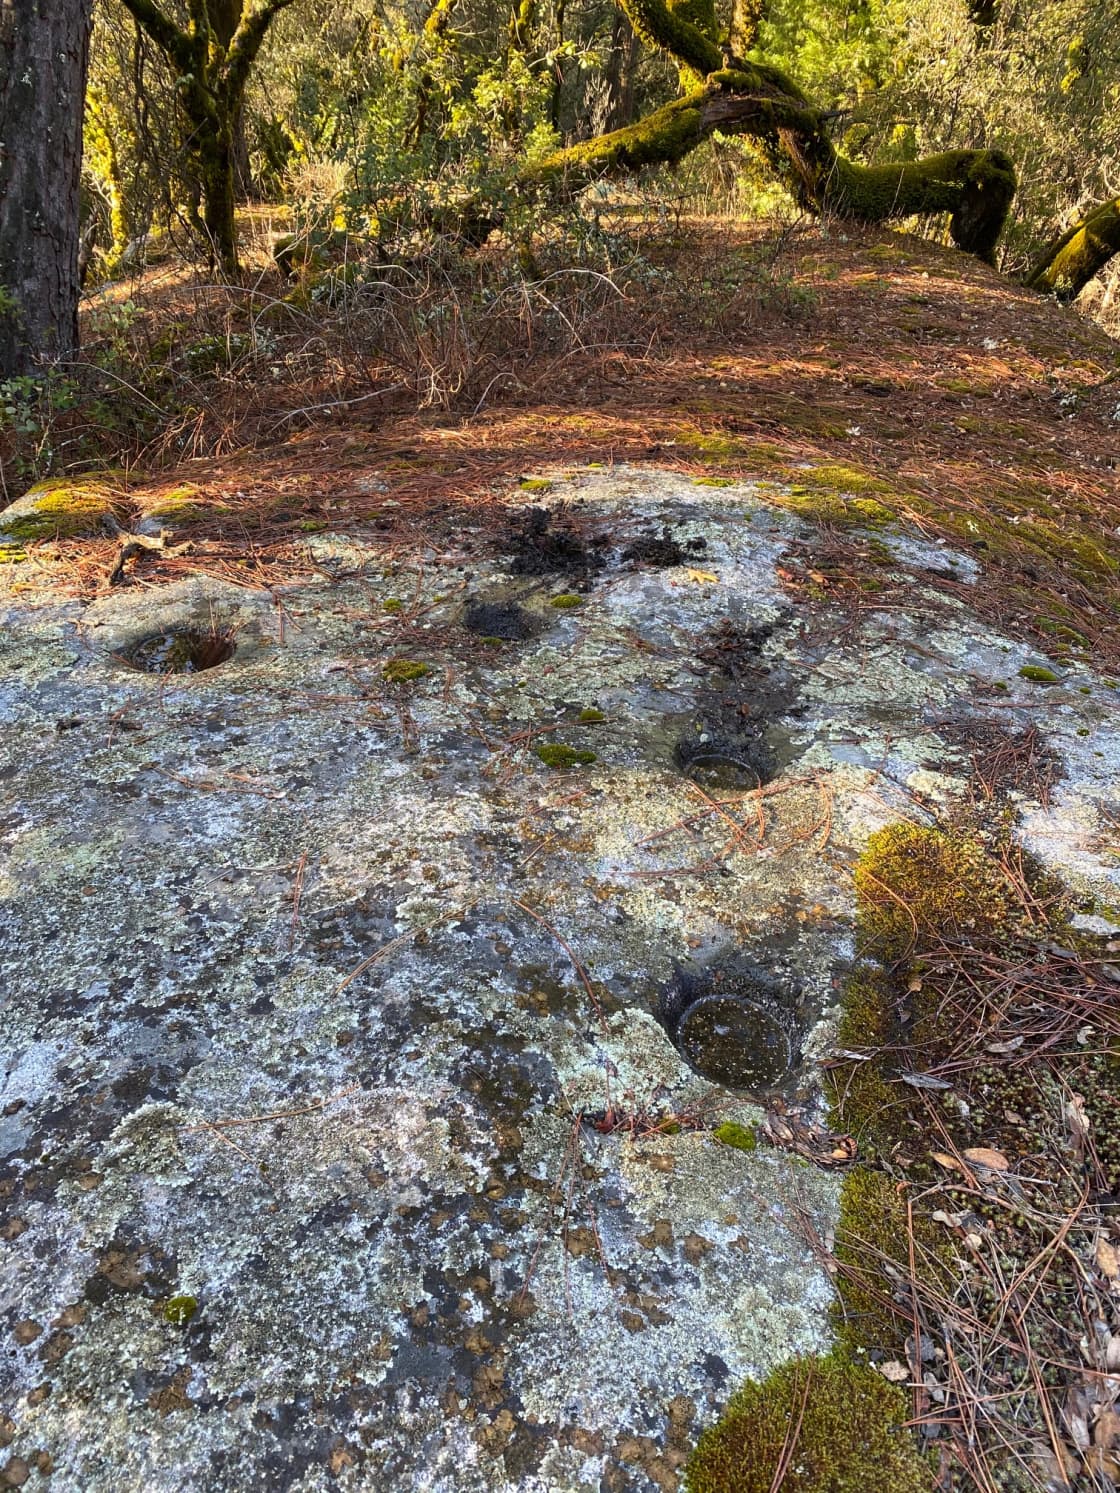 One of the huge grinding stones at the center of the ancient Miwok settlement site 